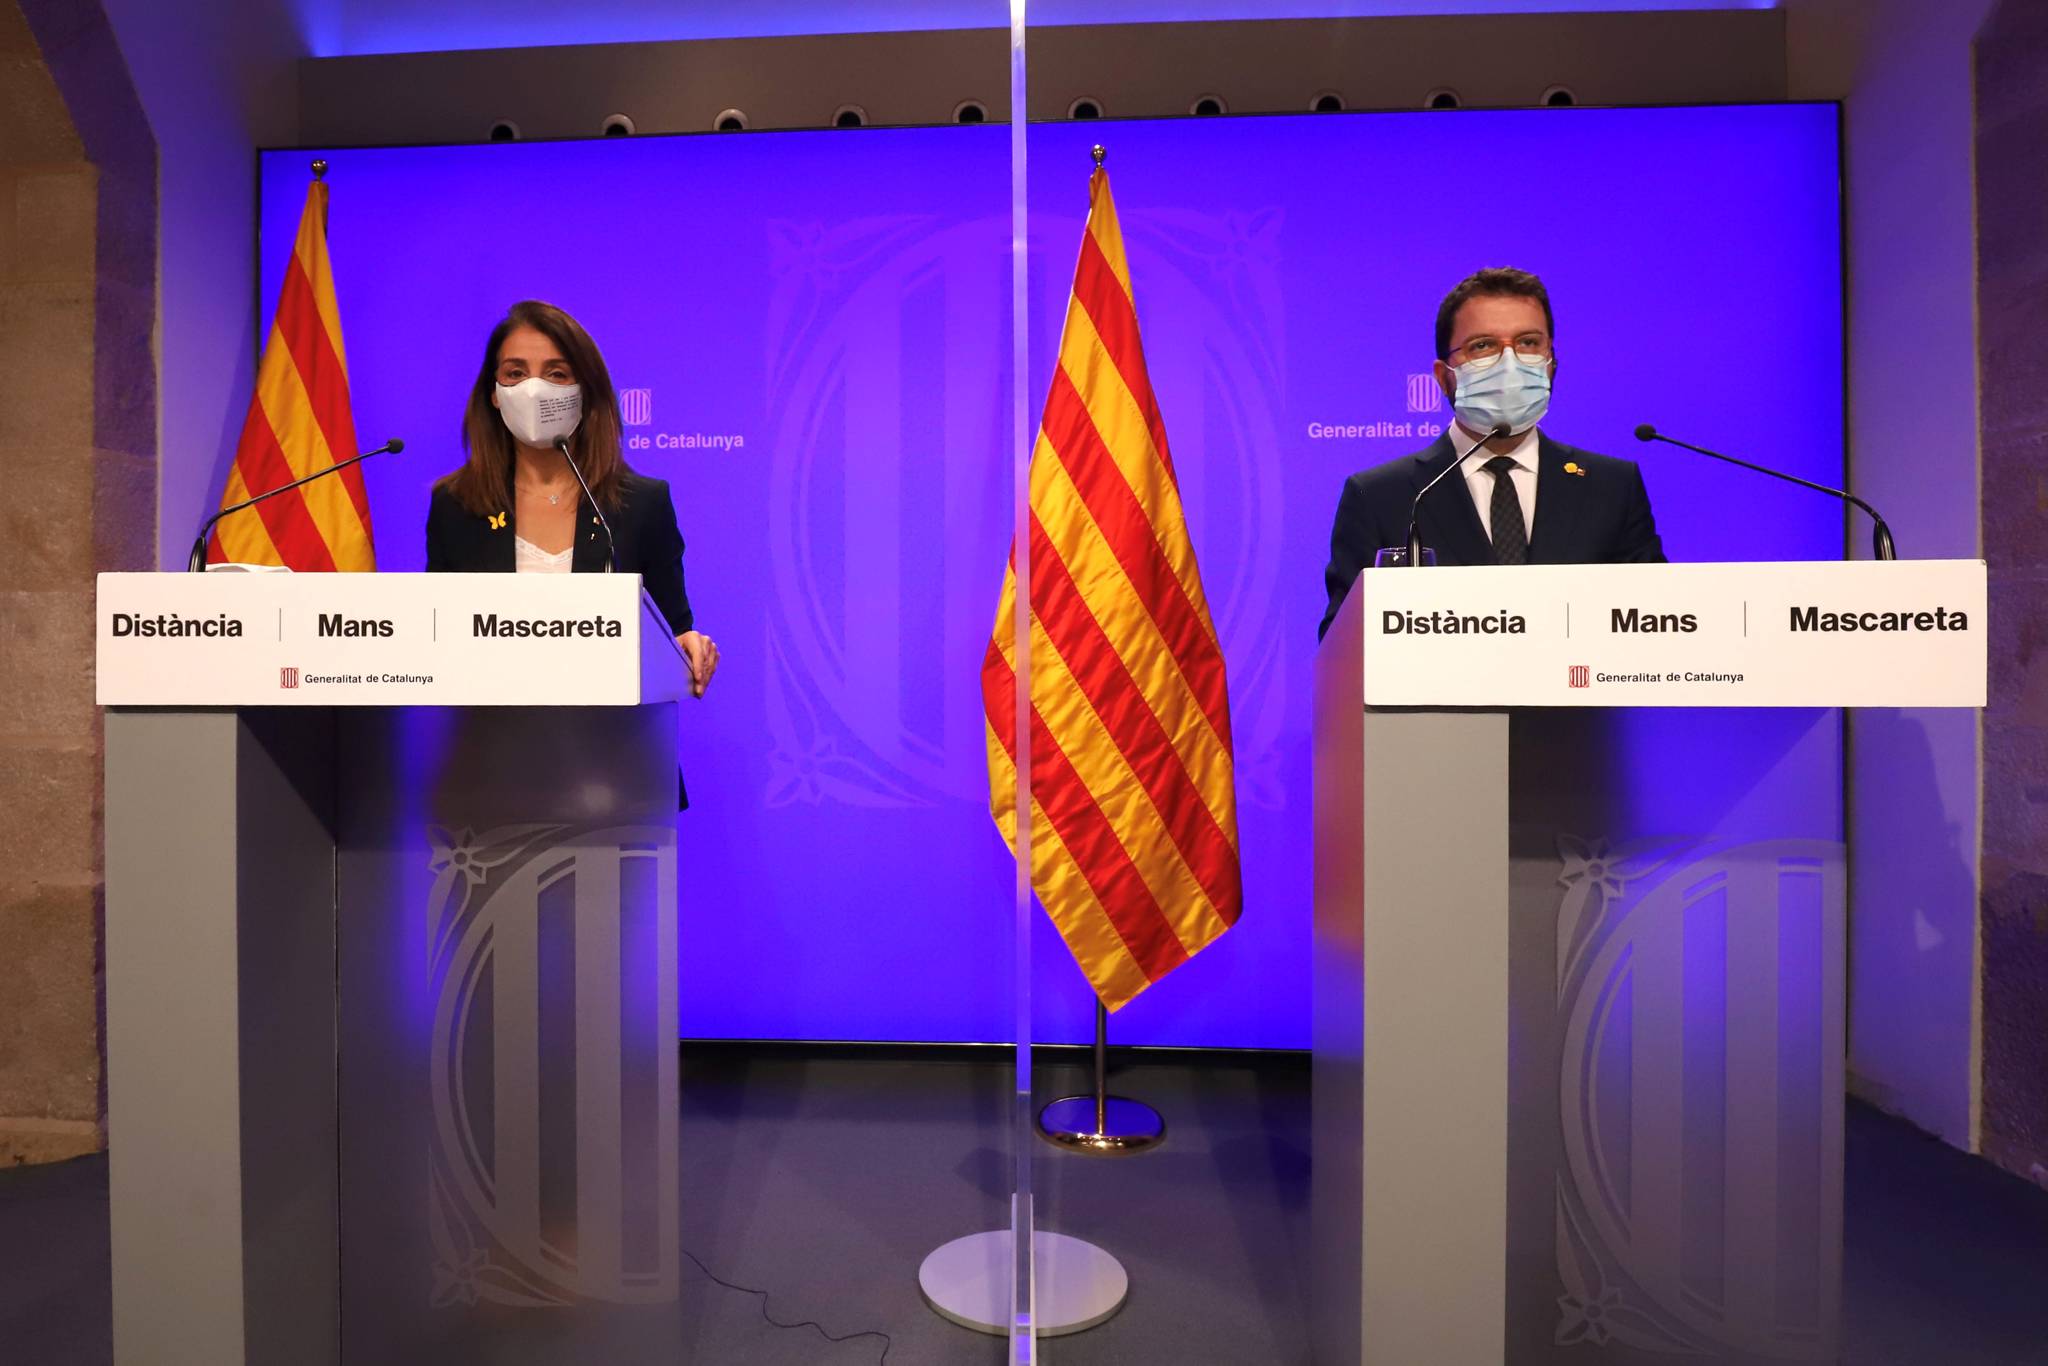 The Catalan Government Agrees on a 15-Day Regional Lockdown and a Local Lockdown at Weekends